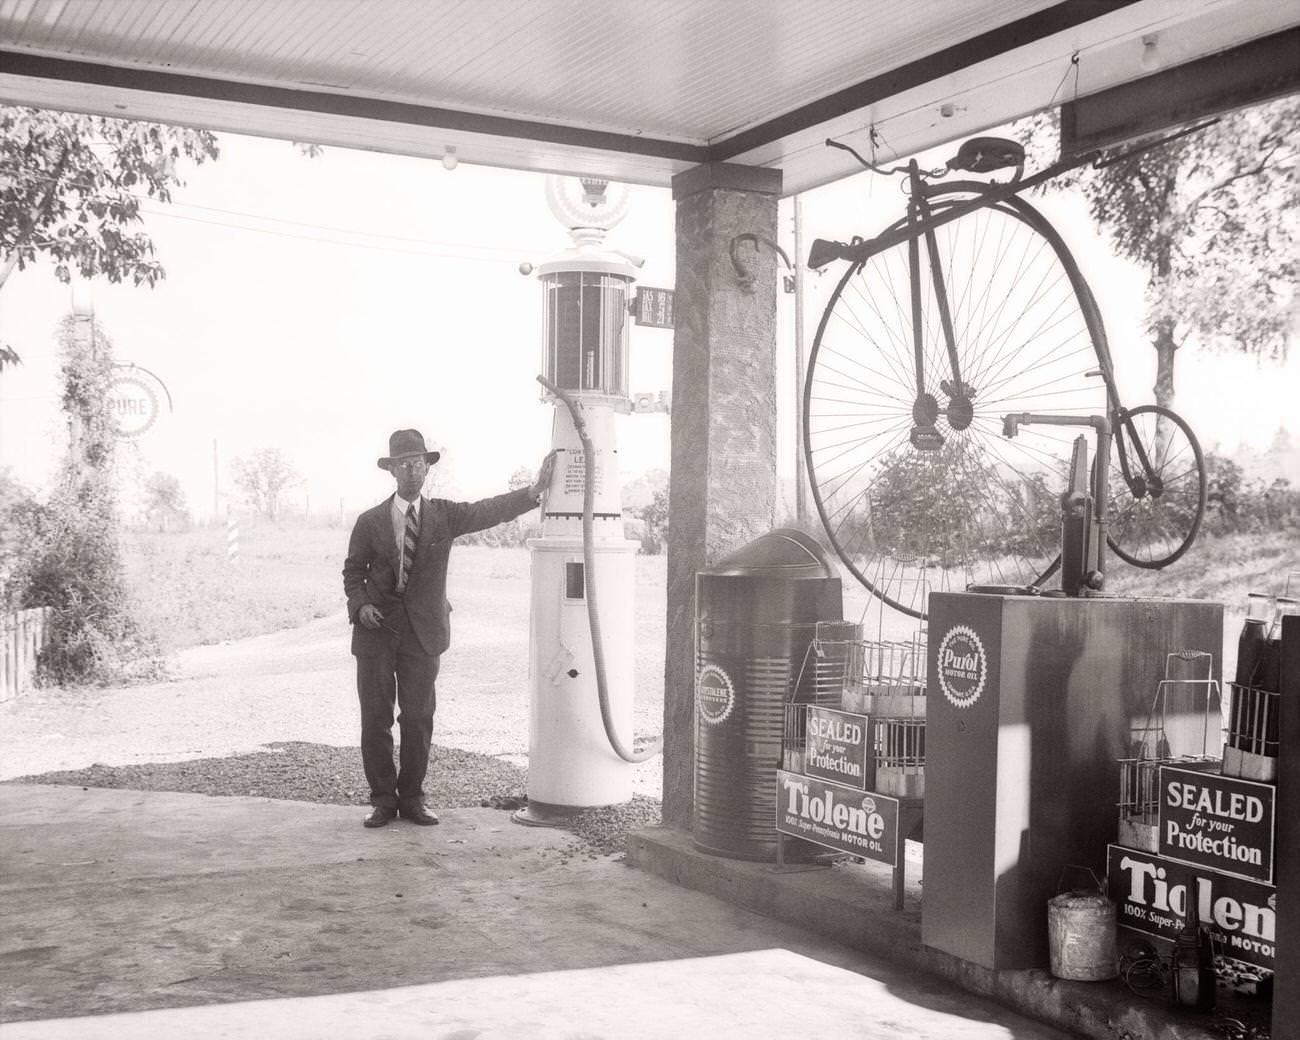 Man leaning on gas pump at filling station in Ohio with antique displays, 1940s.